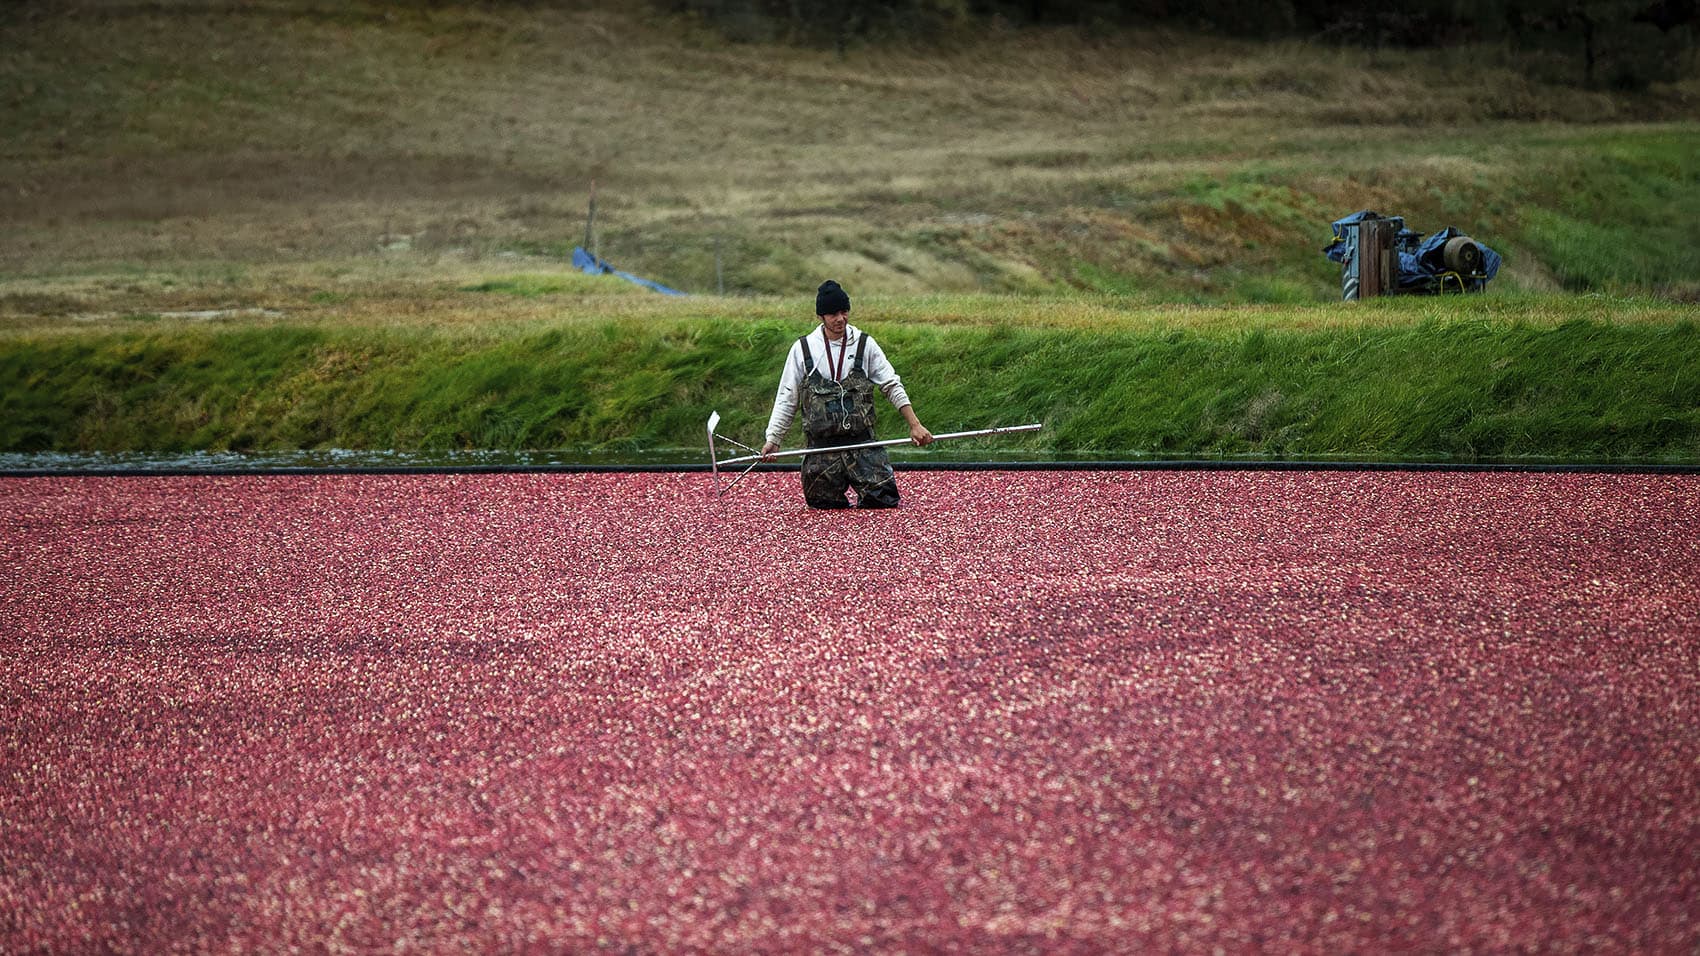 A cranberry harvester stands in a sea of cranberries at Pinnacle Bog in Plymouth. (Jesse Costa/WBUR)